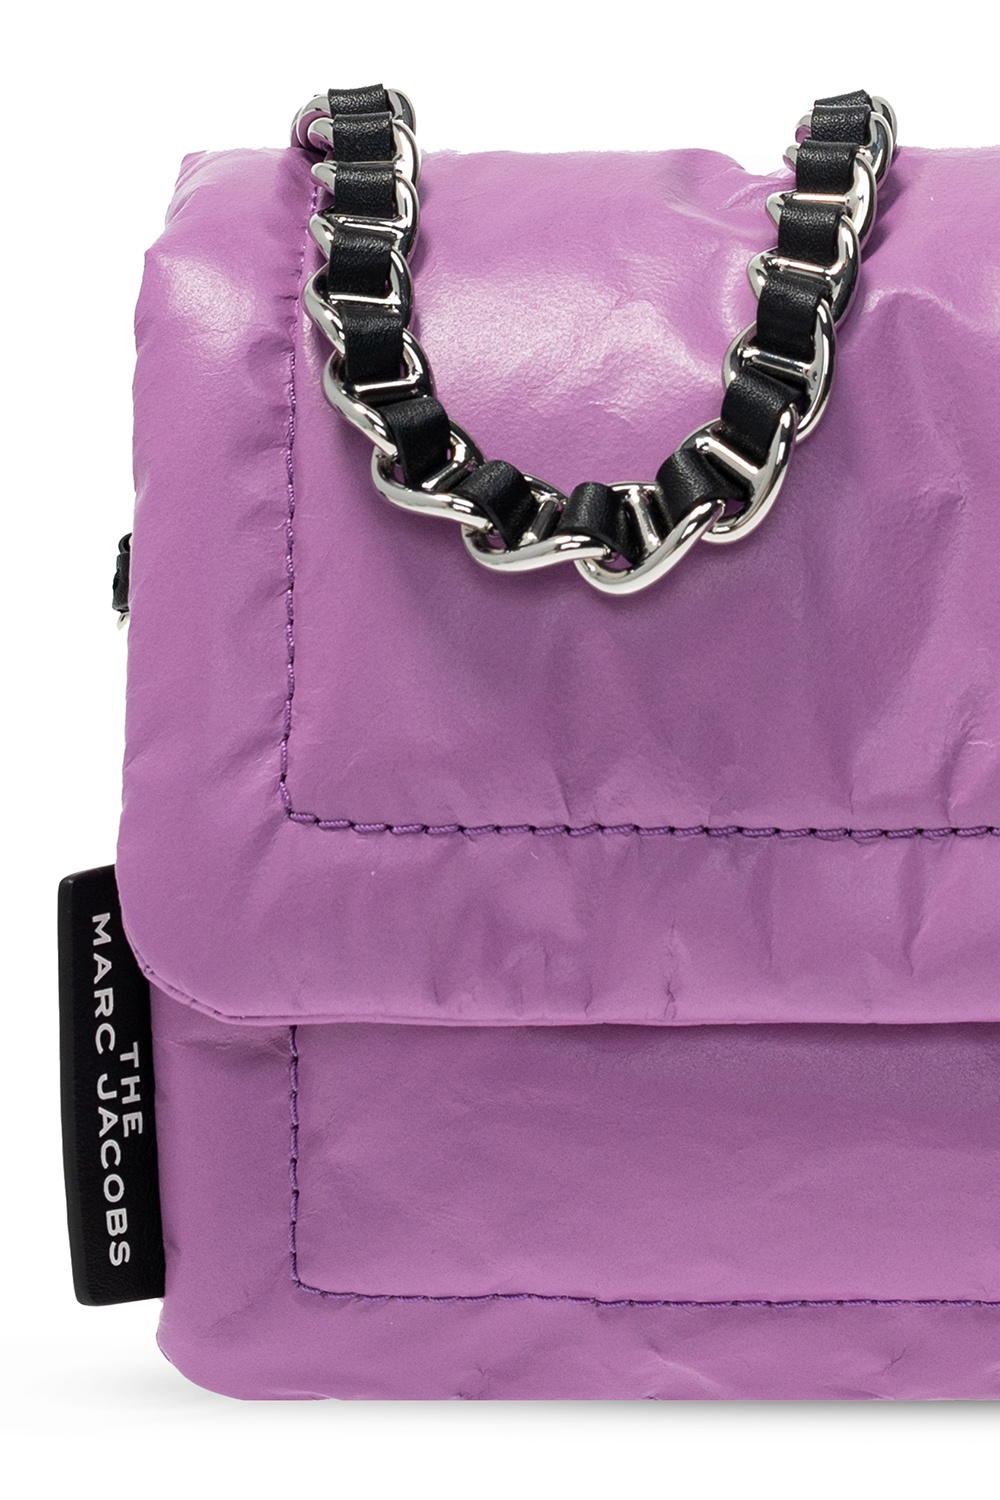 Marc Jacobs pink the pillow leather shoulder bag